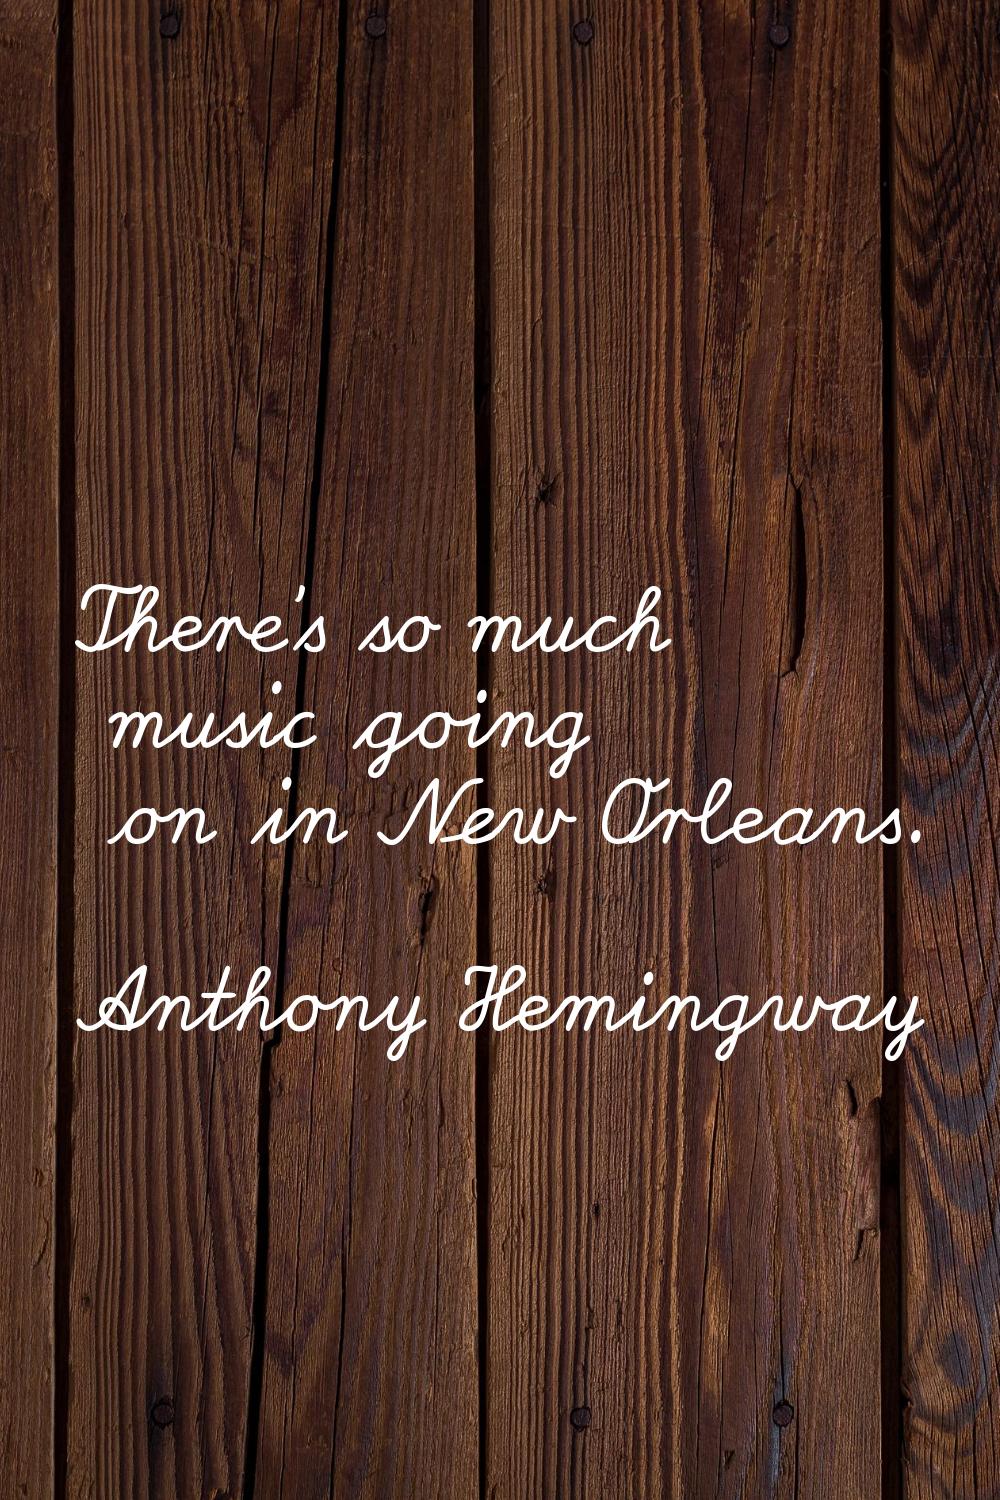 There's so much music going on in New Orleans.